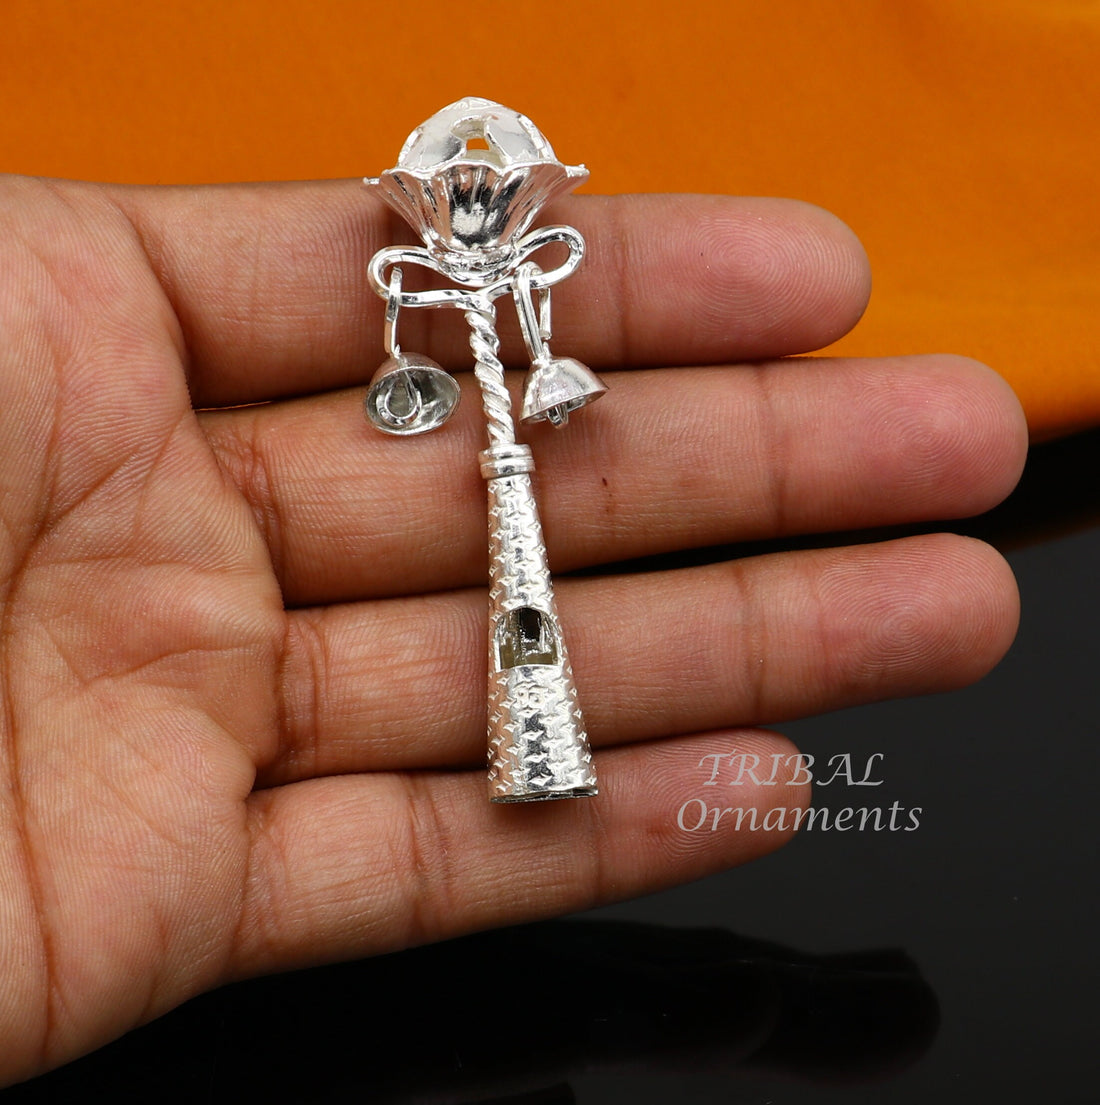 Solid sterling silver handmade design new born baby gifting bells toy, baby krishna gifting toy, silver whistle, silver temple article su862 - TRIBAL ORNAMENTS